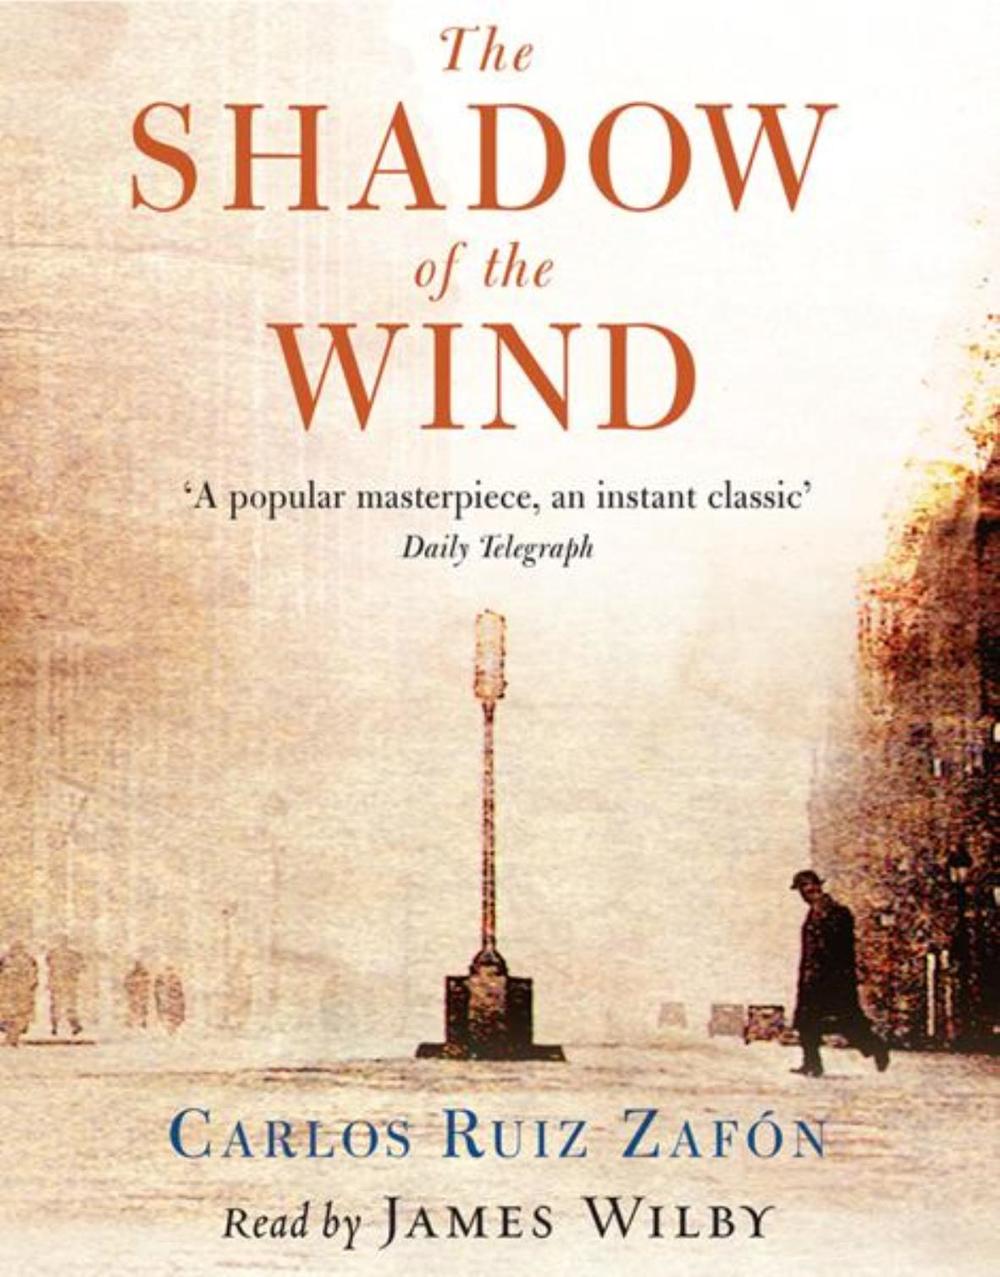 Guest Post: The Evocative and Layered The Shadow of the Wind by Carlos Ruiz Zafon